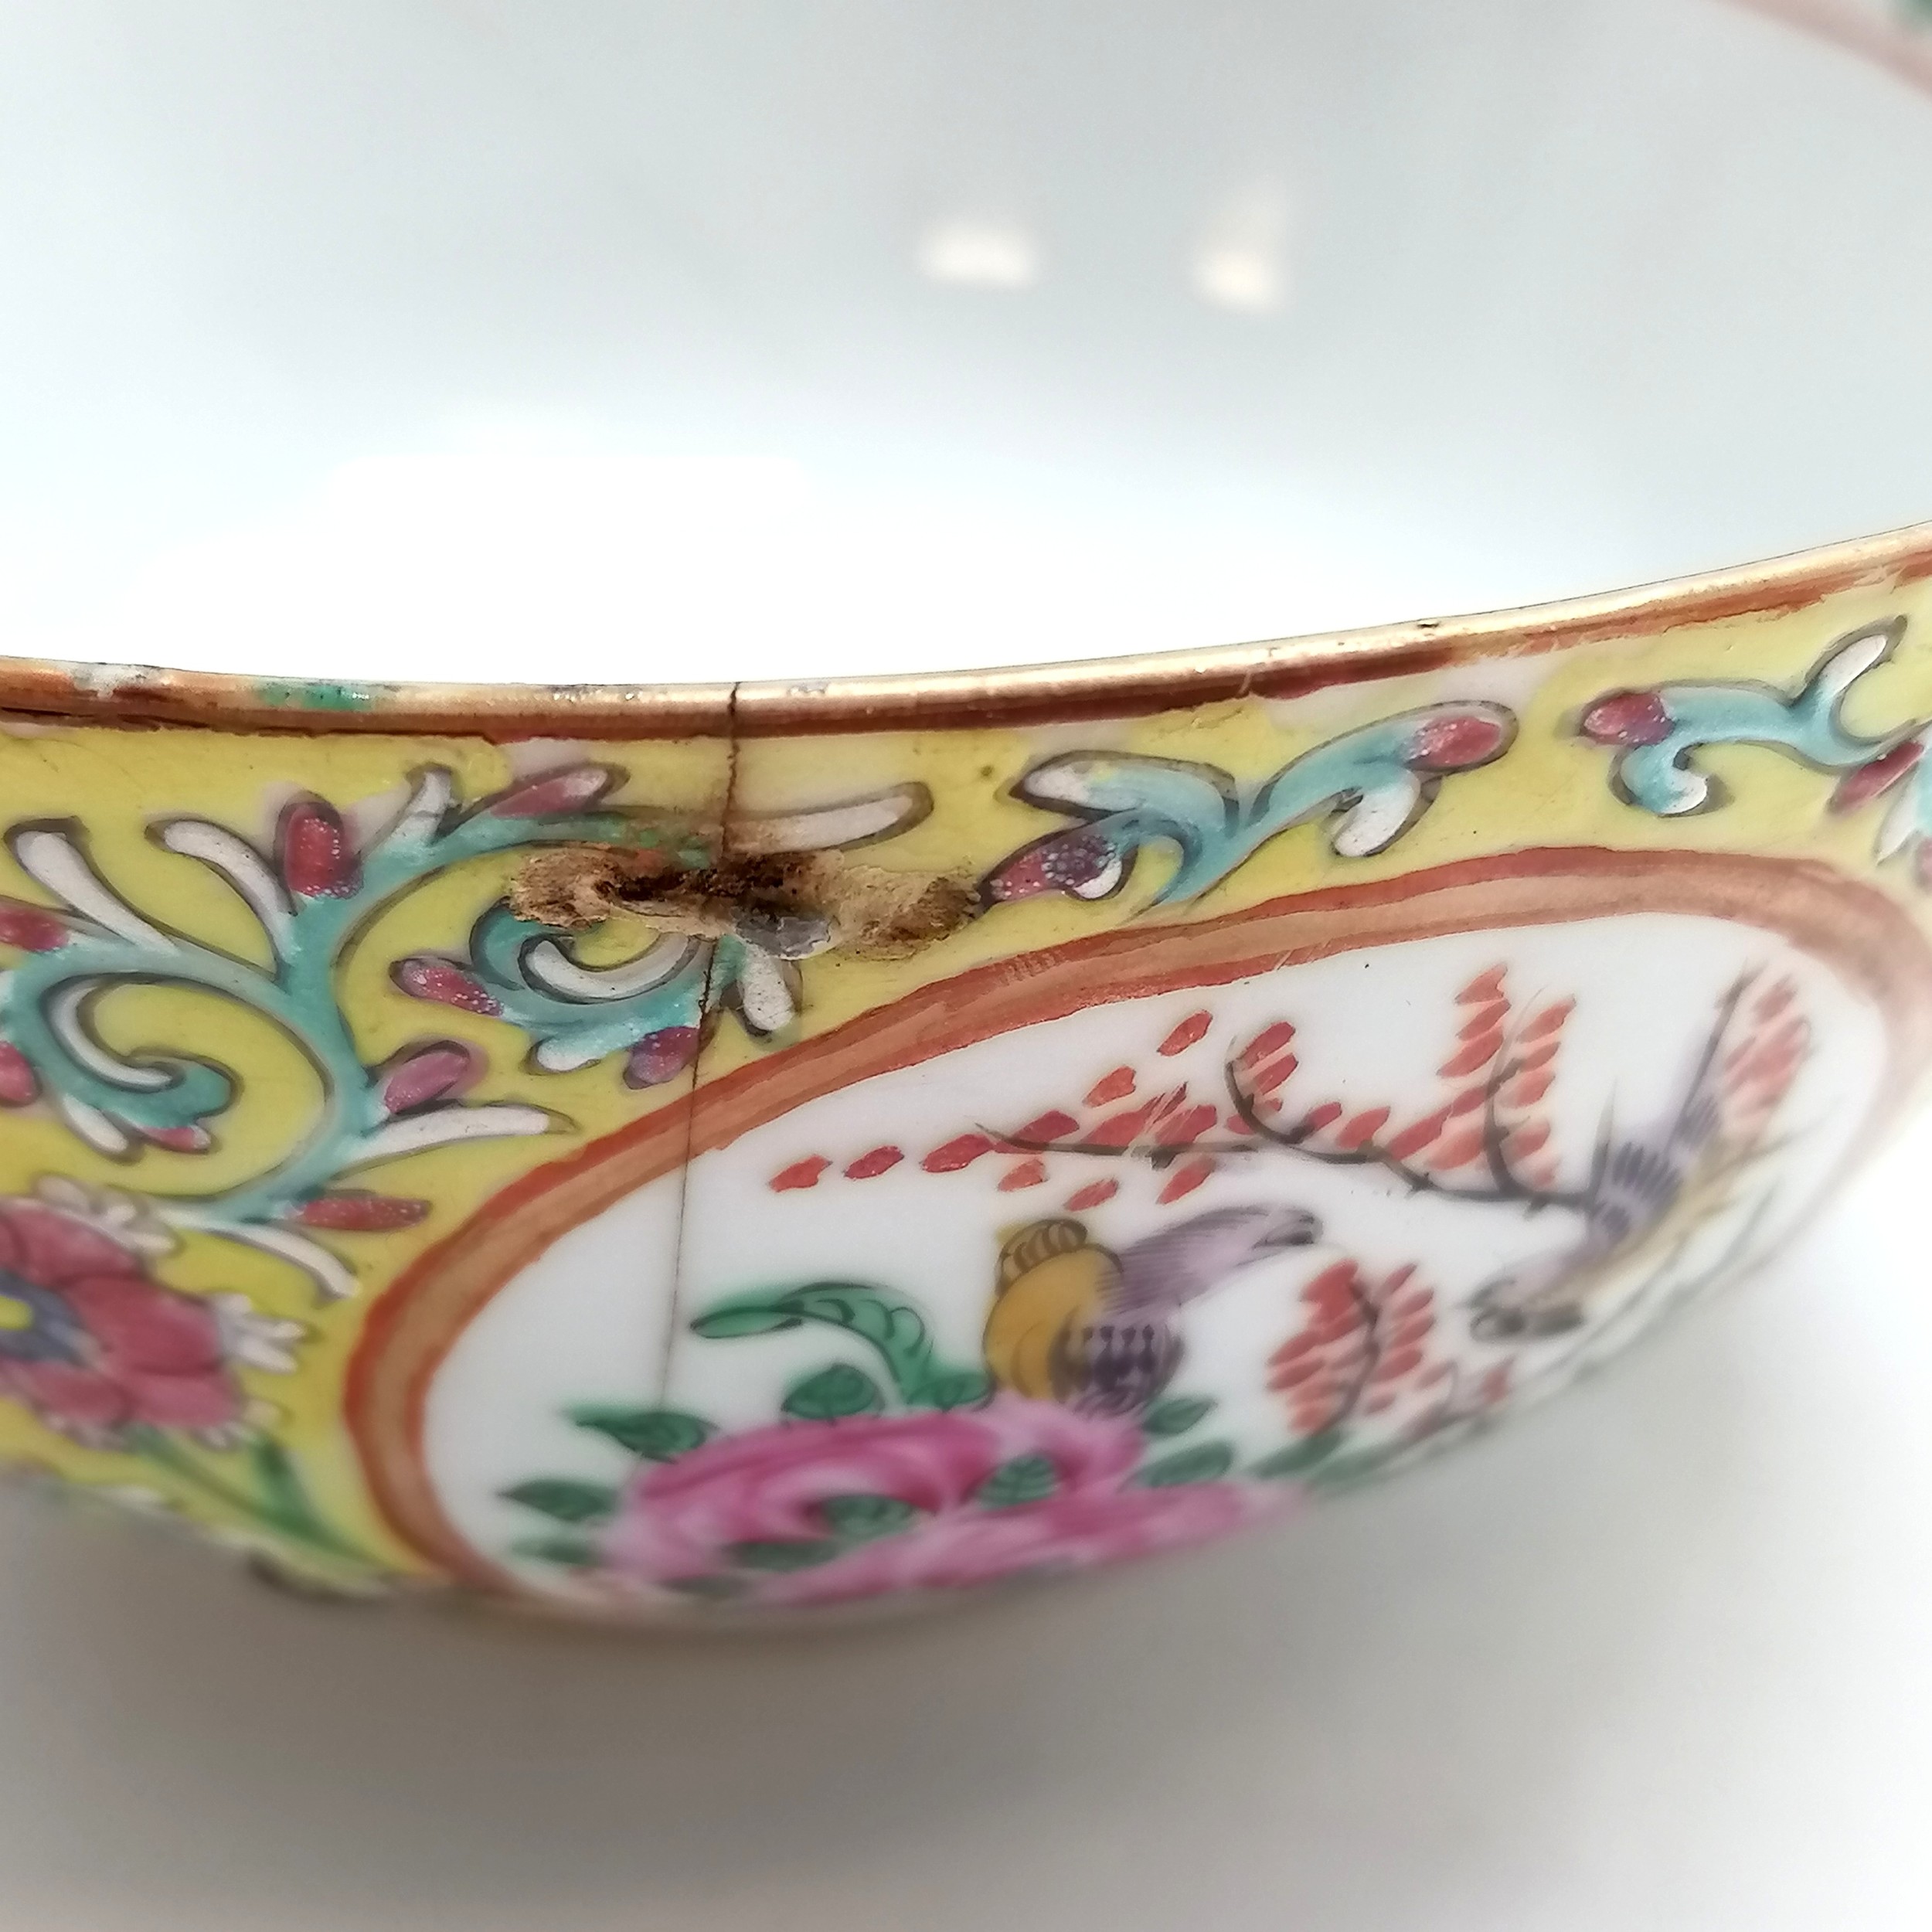 Antique Chinese famille rose bowl - yellow grounded with profuse floral & butterfly & bird (inc - Image 5 of 10